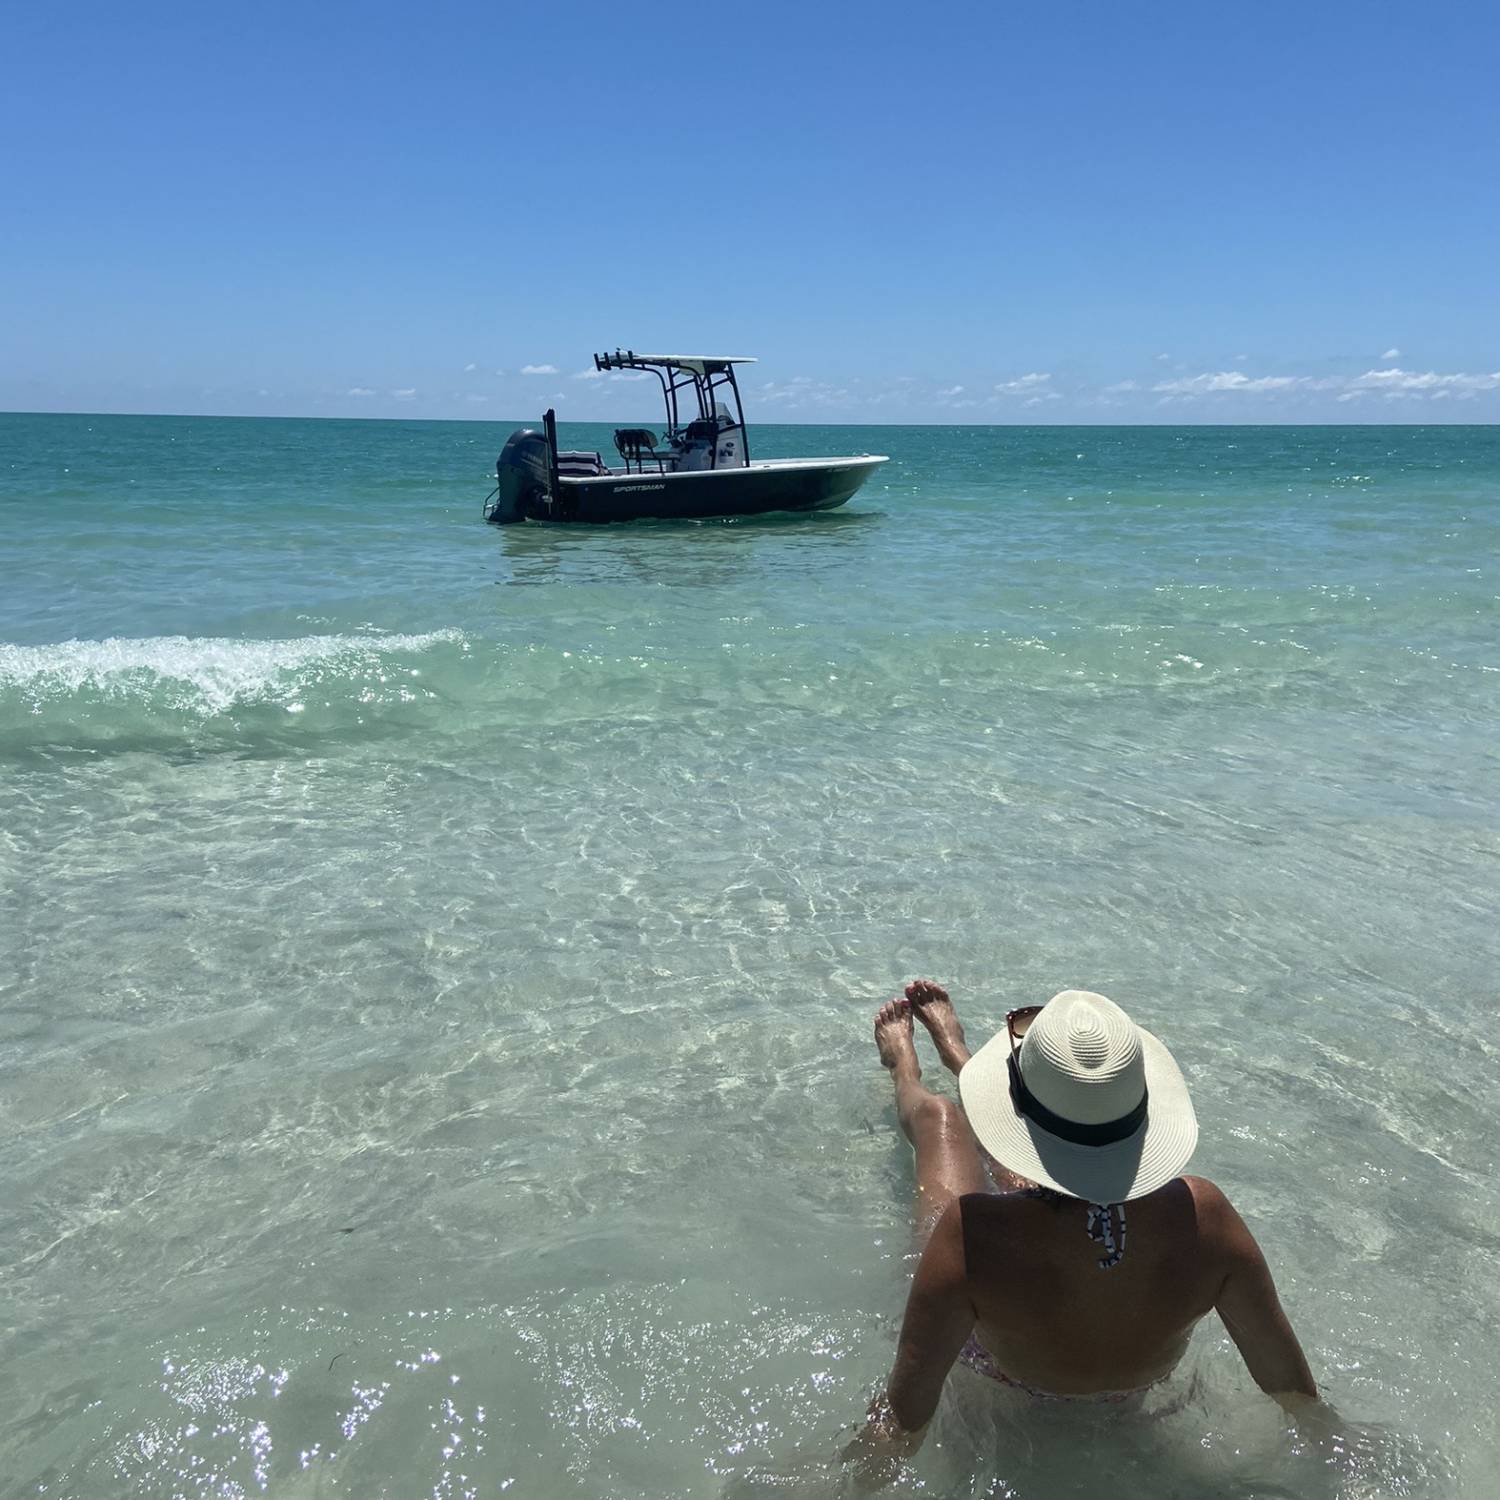 Title: Beach Day - On board their Sportsman Masters 227 Bay Boat - Location: Anna Maria. Participating in the Photo Contest #SportsmanJune